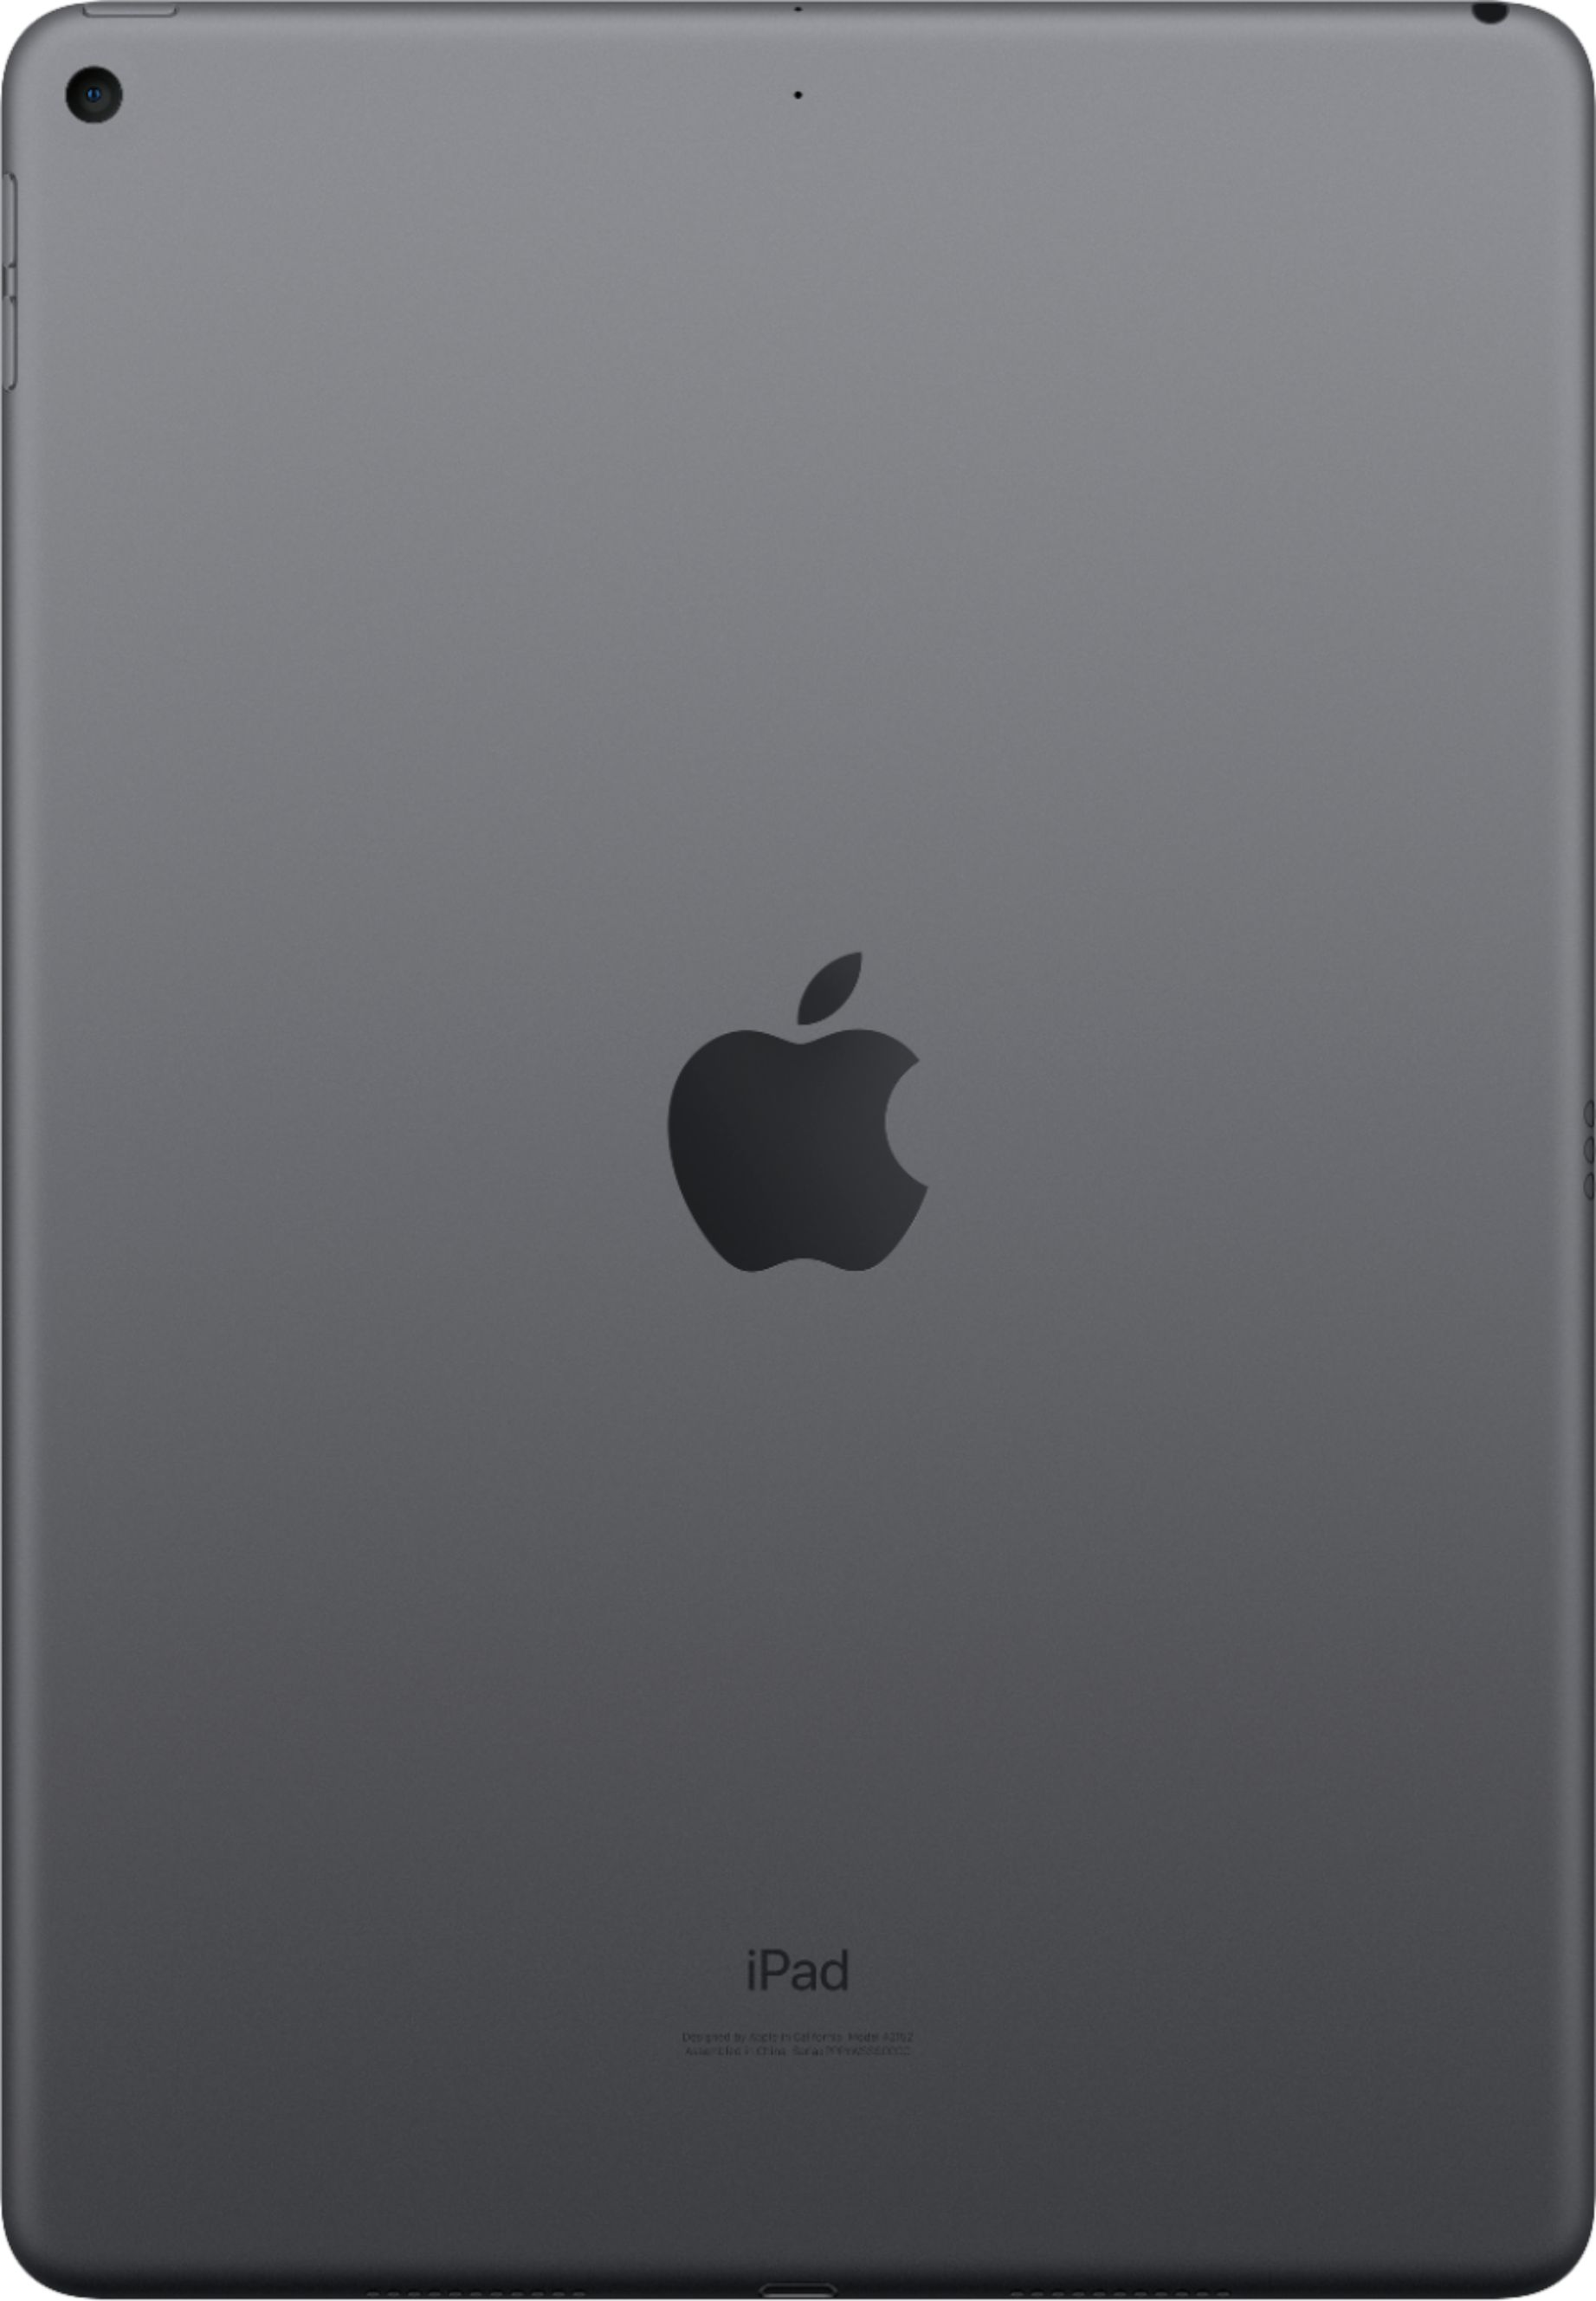 Back View: Apple - Geek Squad Certified Refurbished iPad Air (Latest Model) with Wi-Fi - 64GB - Space Gray